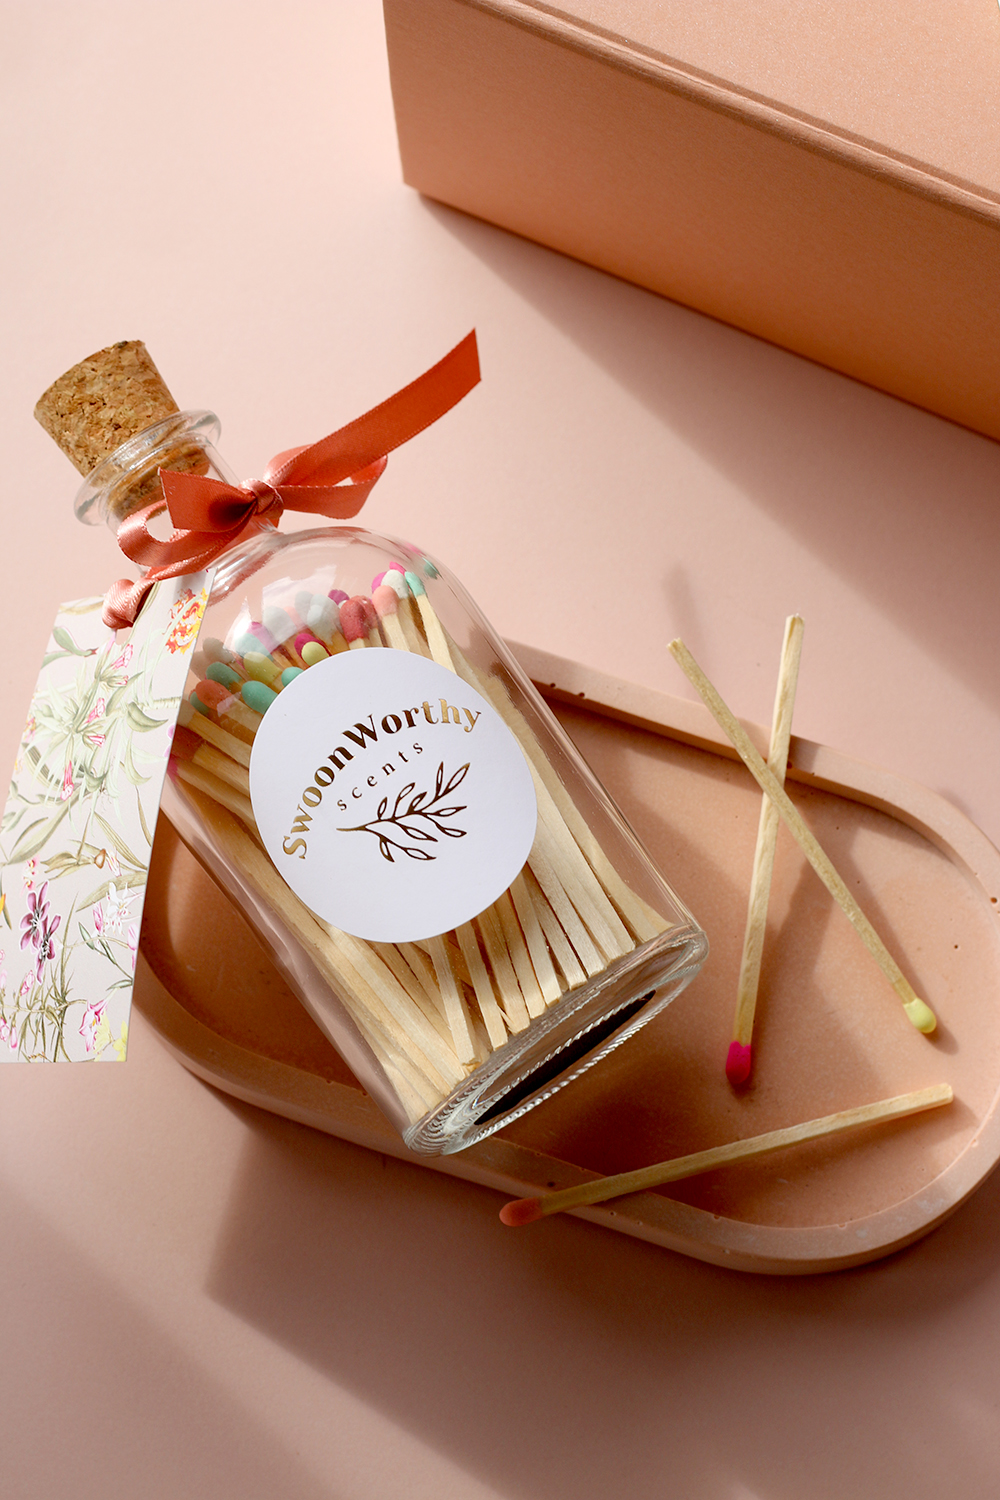 Match bottle with rainbow matches from Swoon Worthy Scents